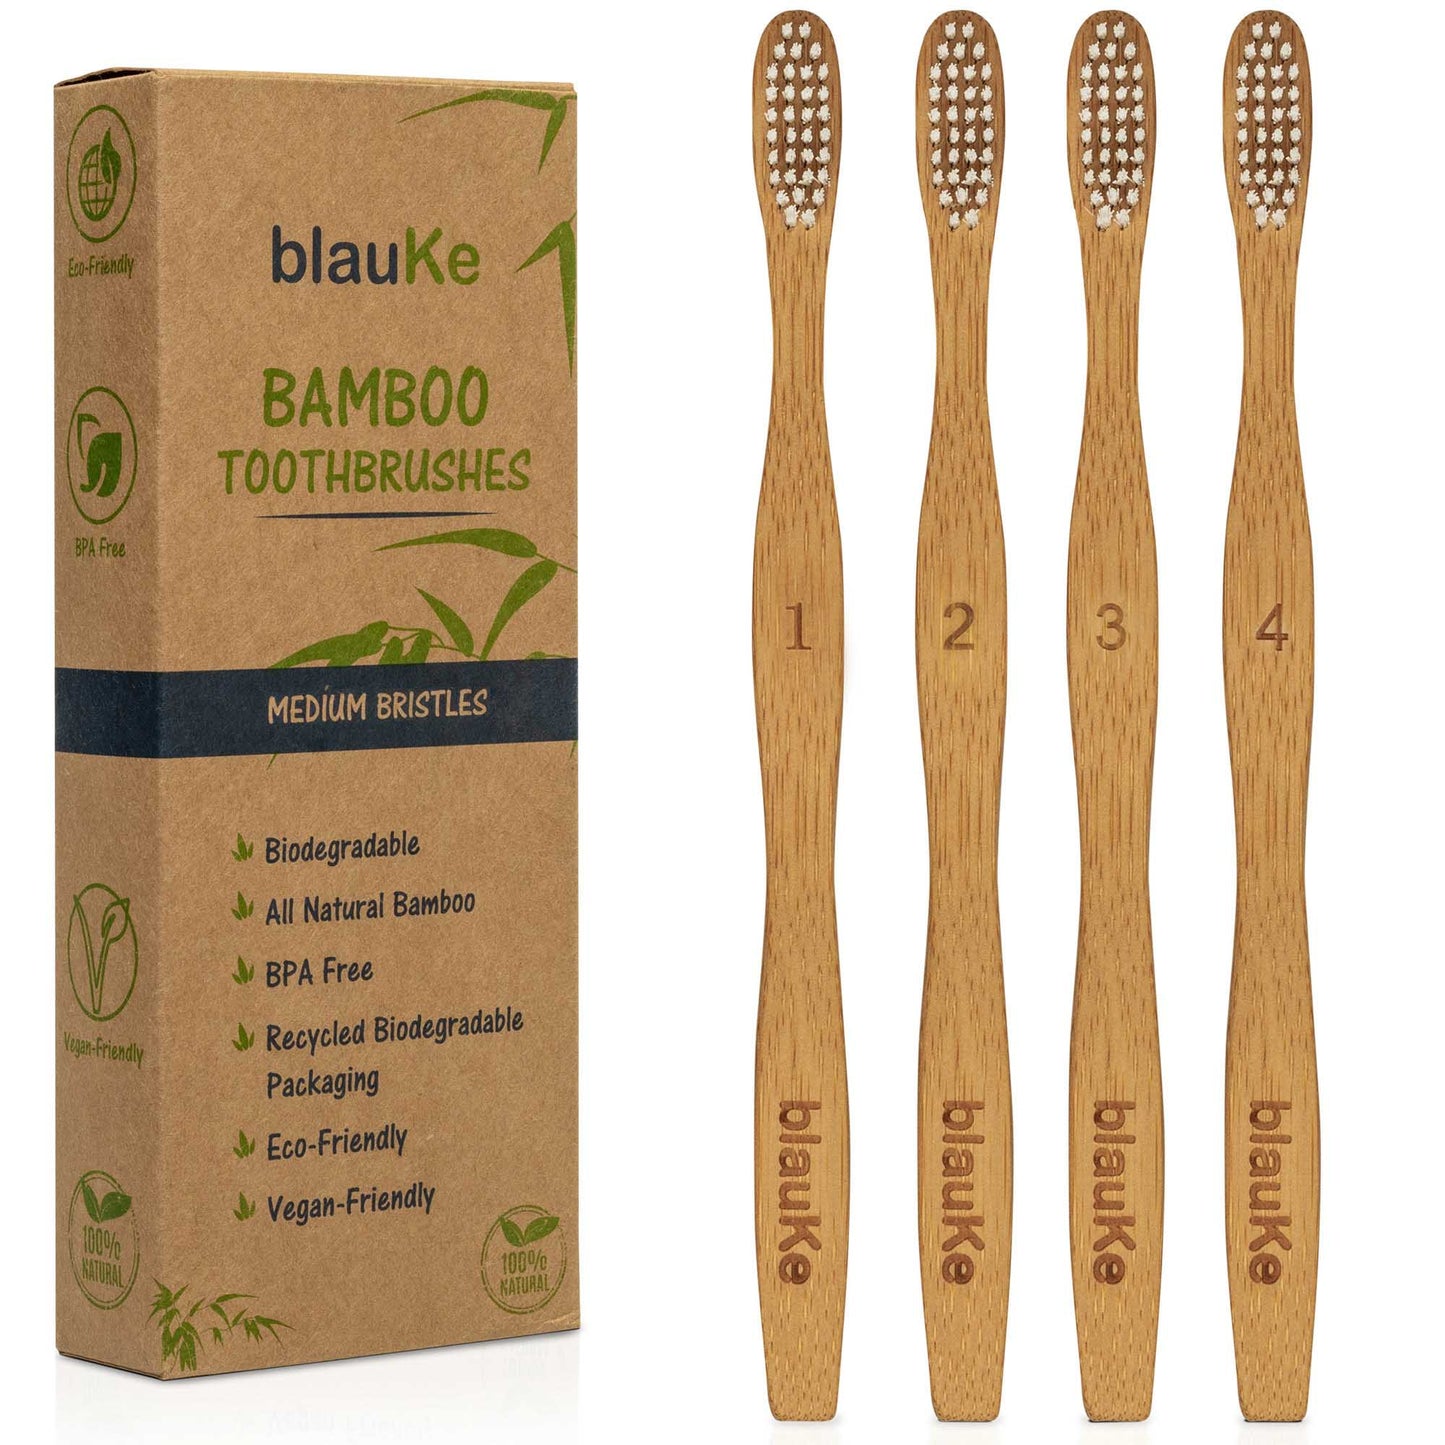 Bamboo Toothbrush Set 4-Pack - Bamboo Toothbrushes with Medium Bristles for Adults - Eco-Friendly, Biodegradable, Natural Wooden Toothbrushes-0